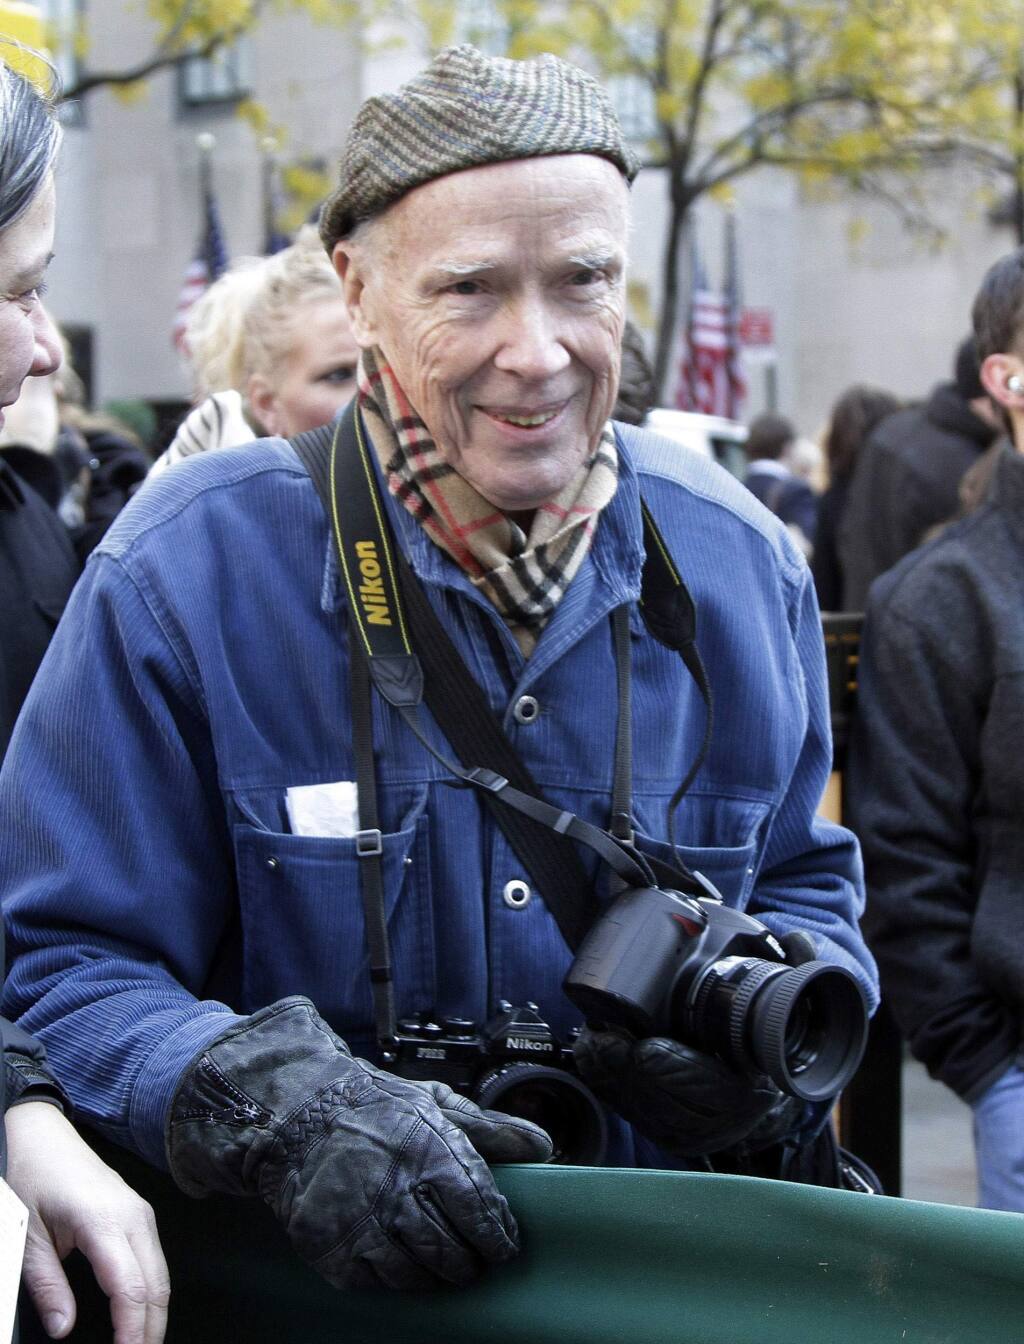 FILE - In this Nov. 11, 2011 file photo, New York Times photographer Bill Cunningham waits for the arrival of the annual Rockefeller Center Christmas tree, in New York. Cunningham, a longtime fashion photographer for The New York Times known for taking pictures of everyday people on the streets in New York died on Saturday, June 25, 2016, after suffering a stroke in New York. He was 87. (AP Photo/Richard Drew, File)